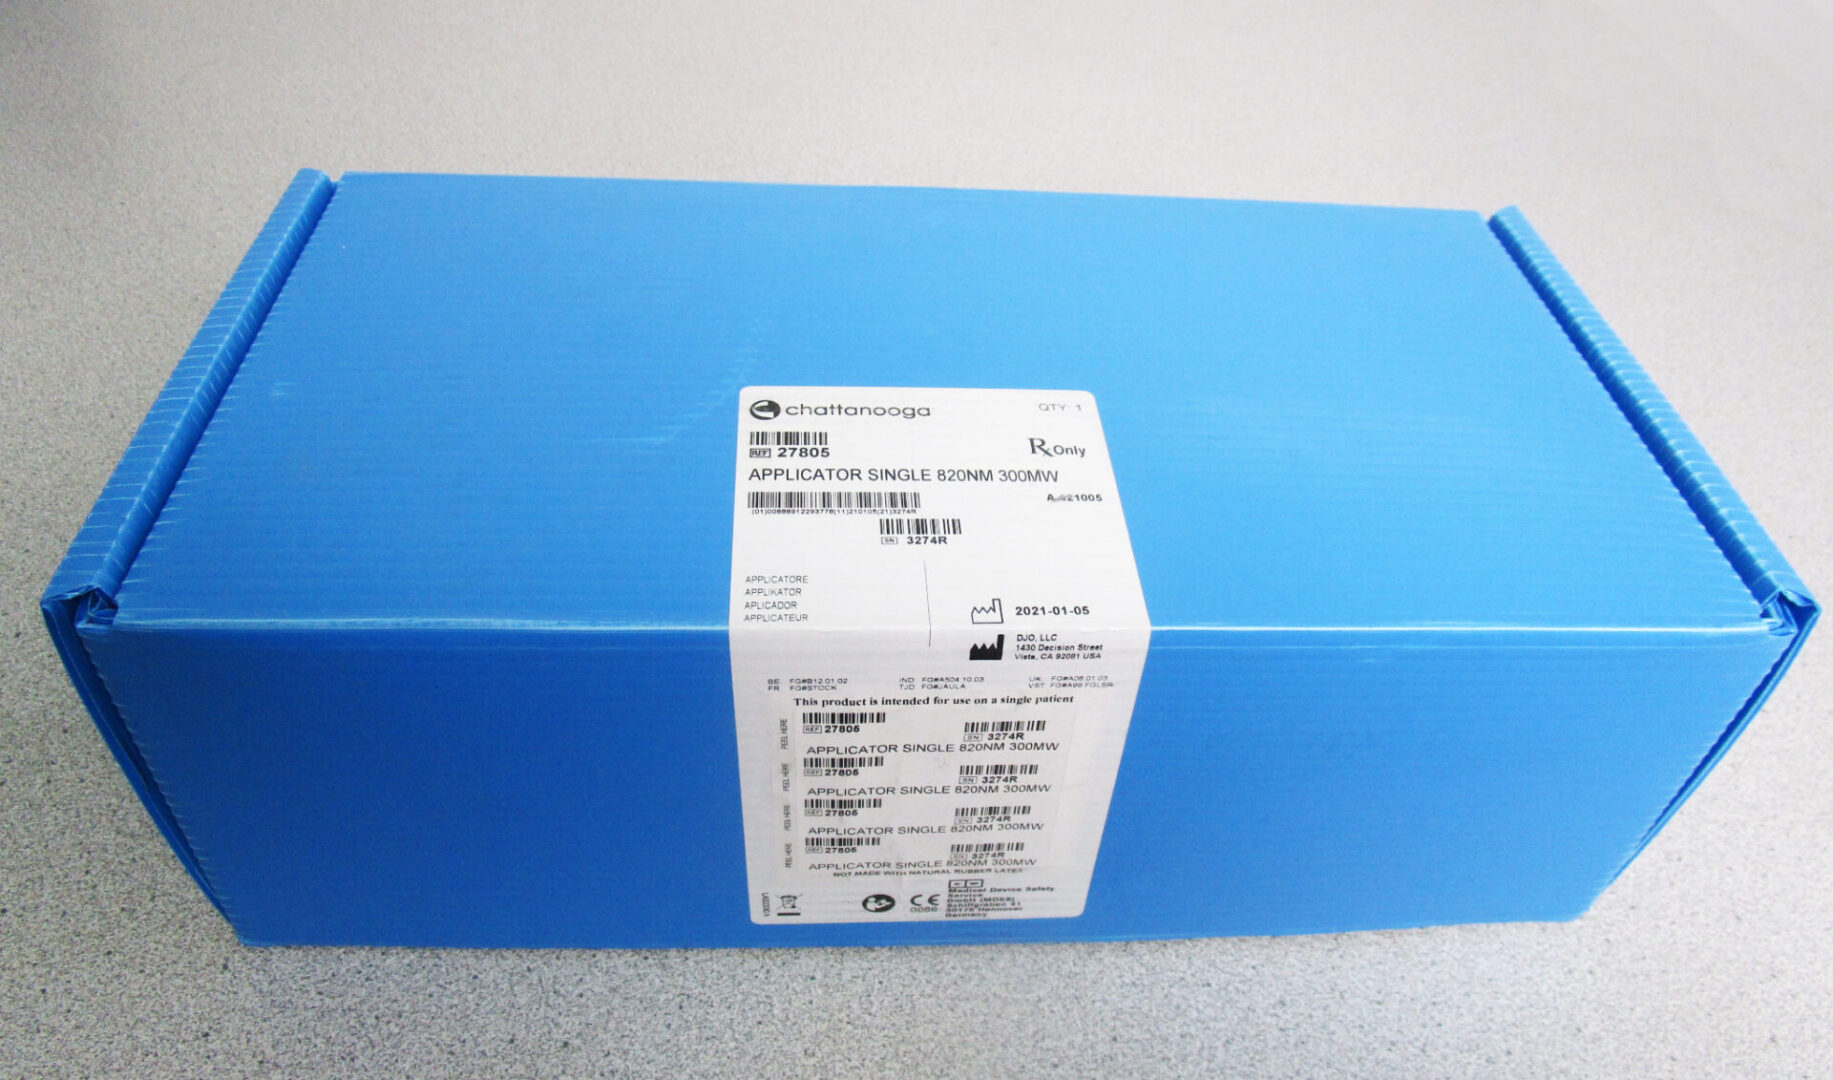 A box with a label on it